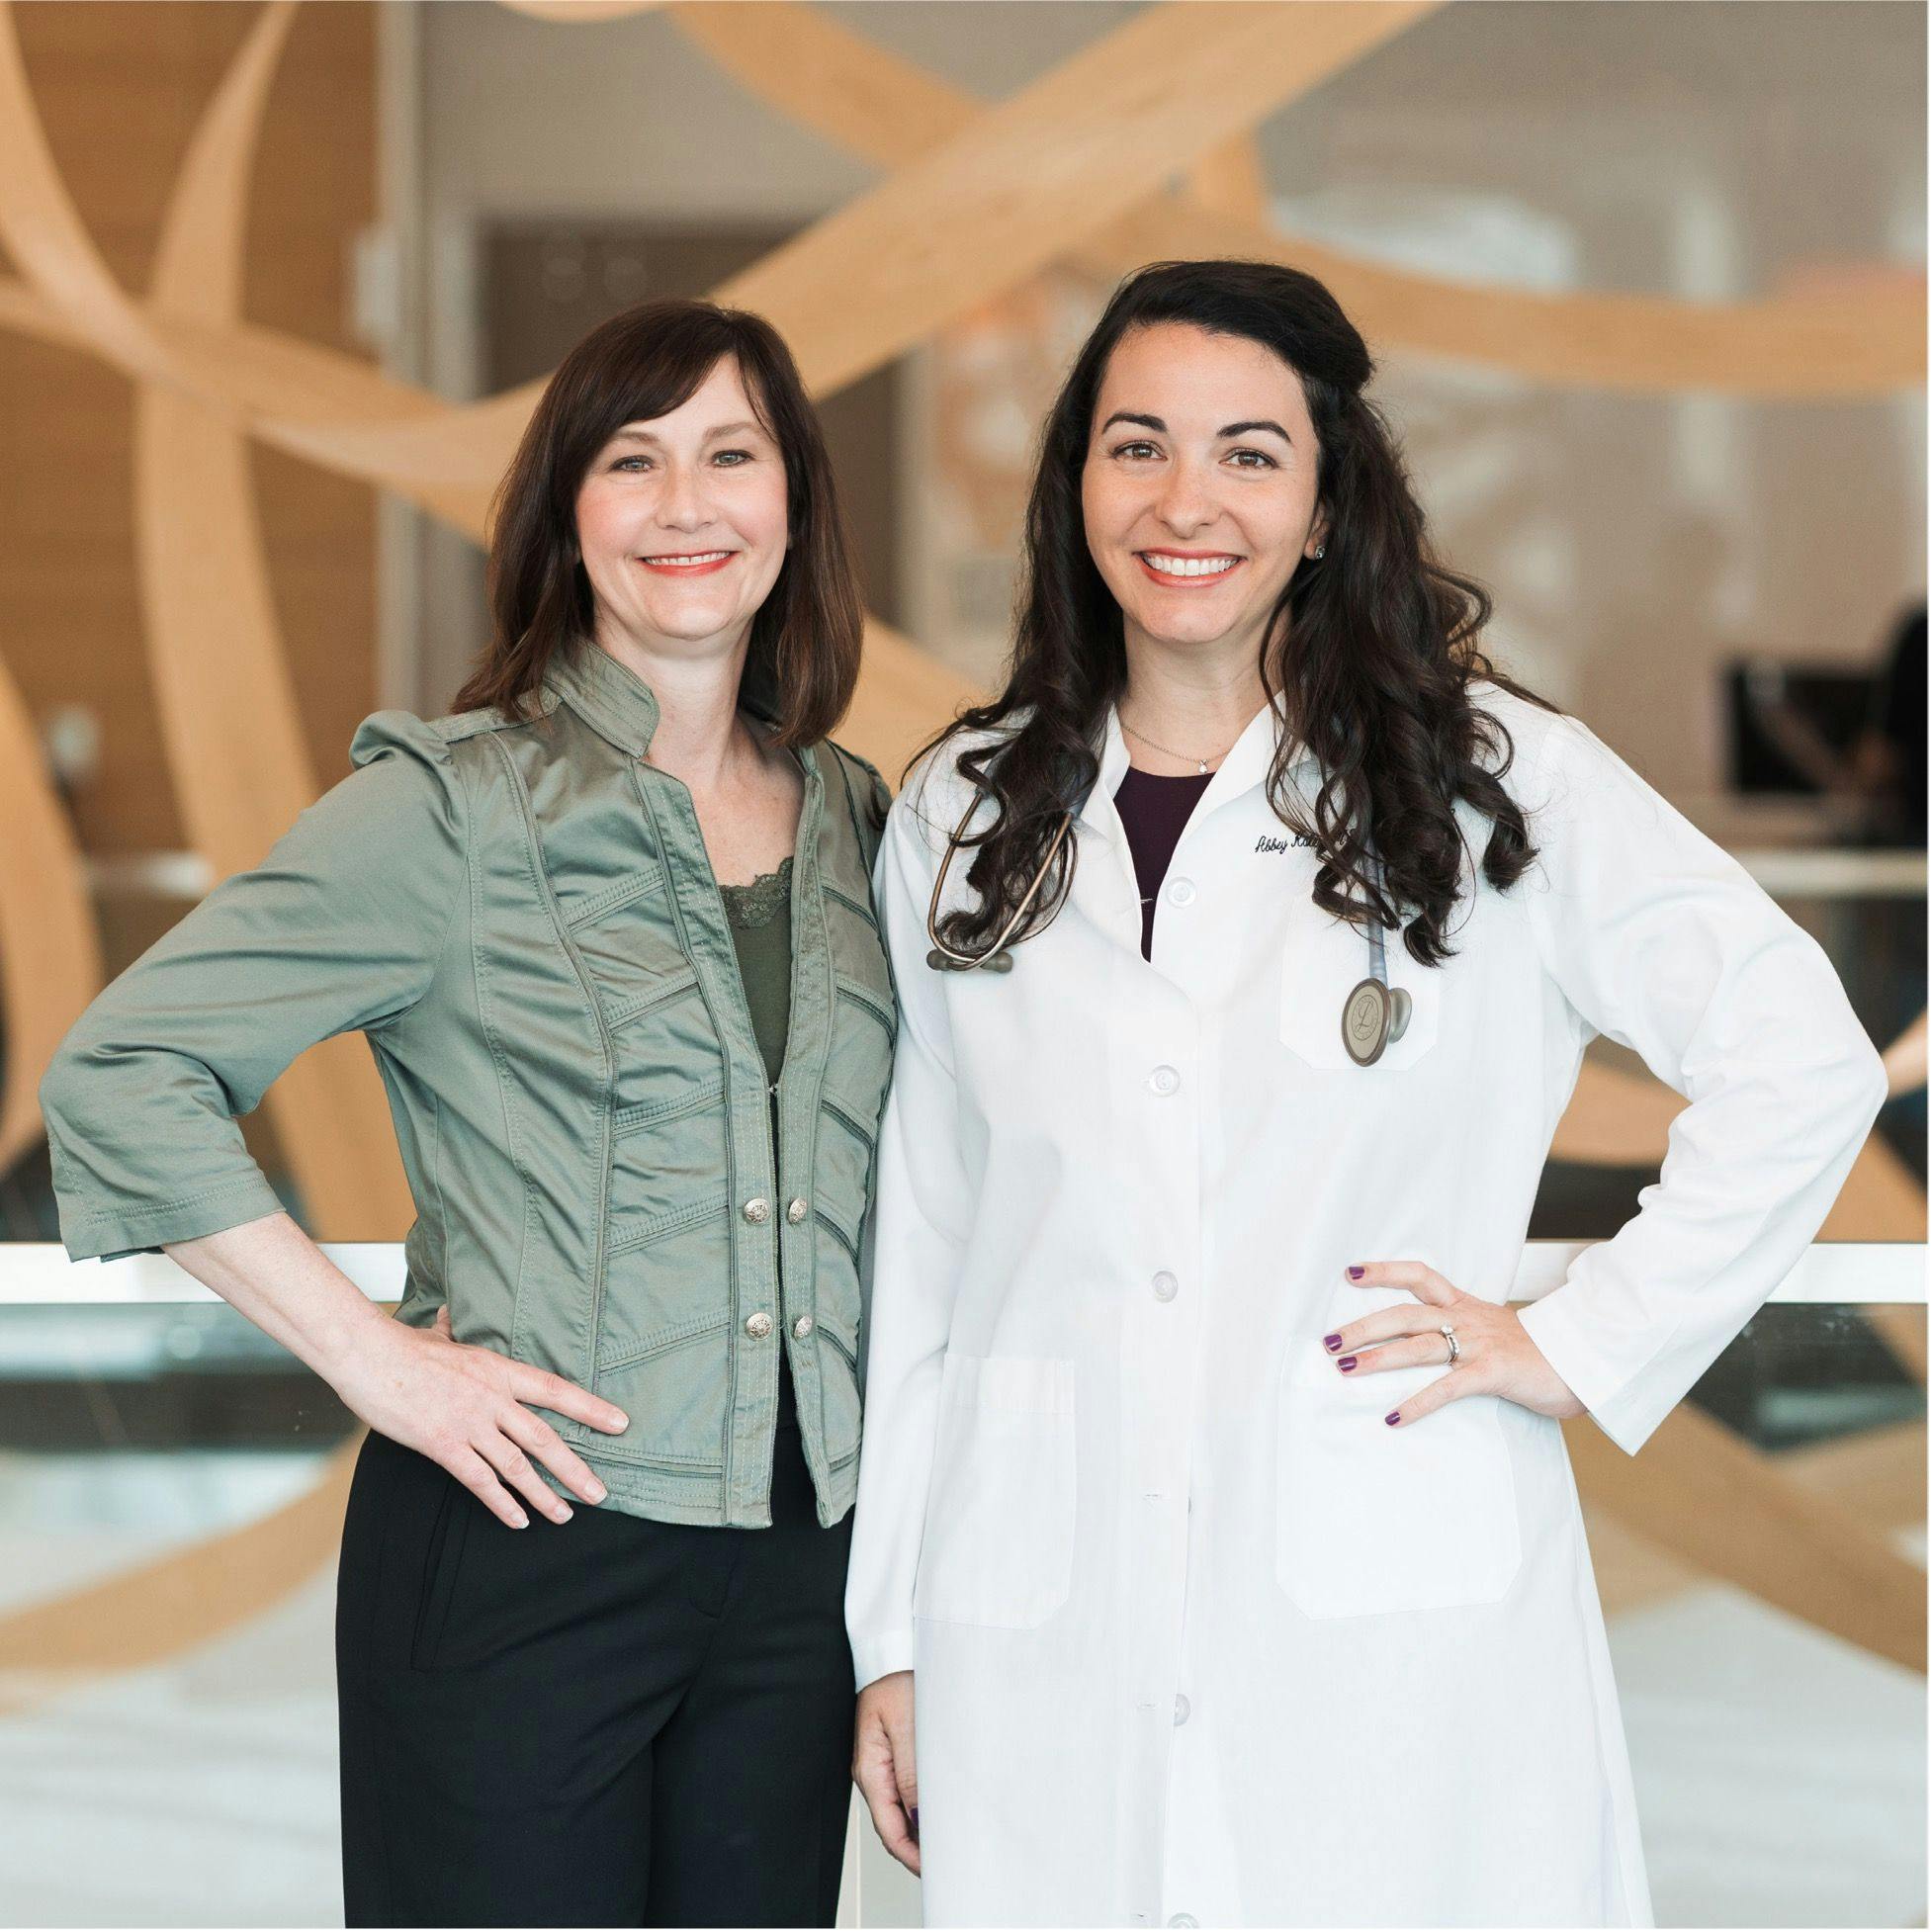   From left: Alex Frenzel, a patient with advanced breast cancer who helped draft the nomination, and Abbey Kaler, M.S., APRN, FNP-C, CMSRN  Photo by Diana Chavez